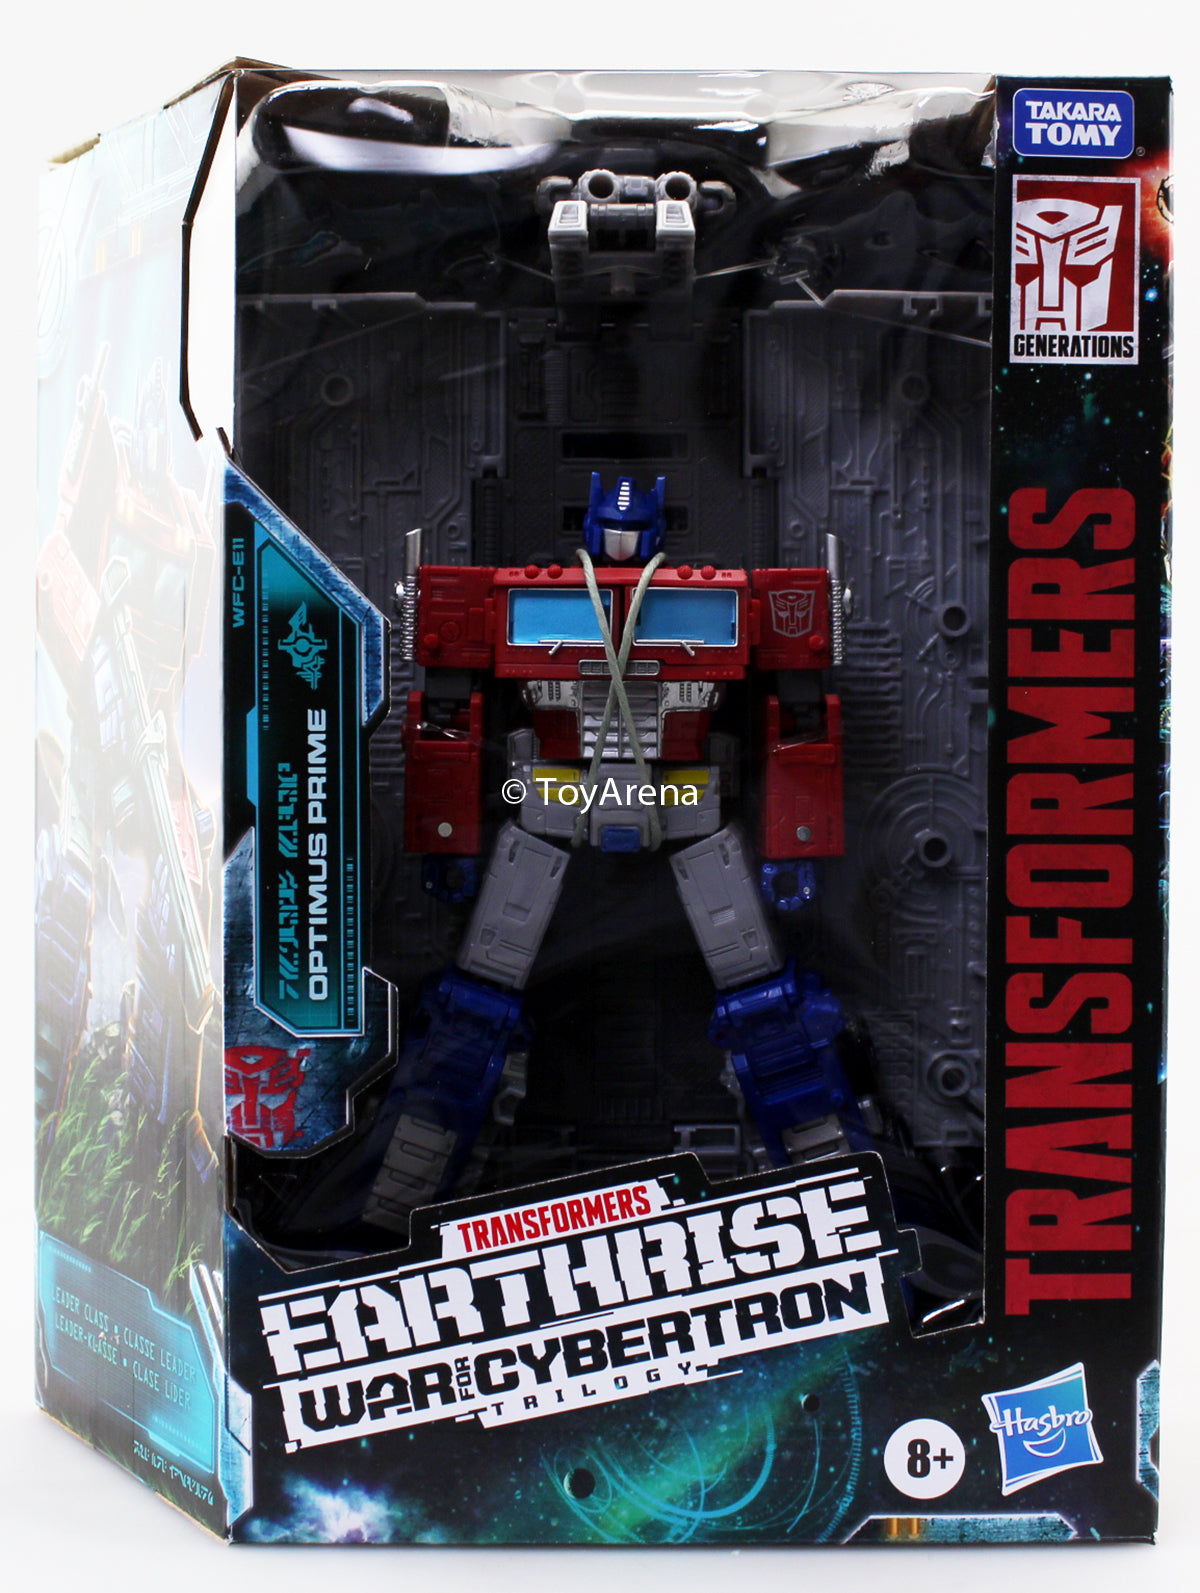 Hasbro Transformers War for Cybertron Earthrise Leader Optimus Prime Action Figure